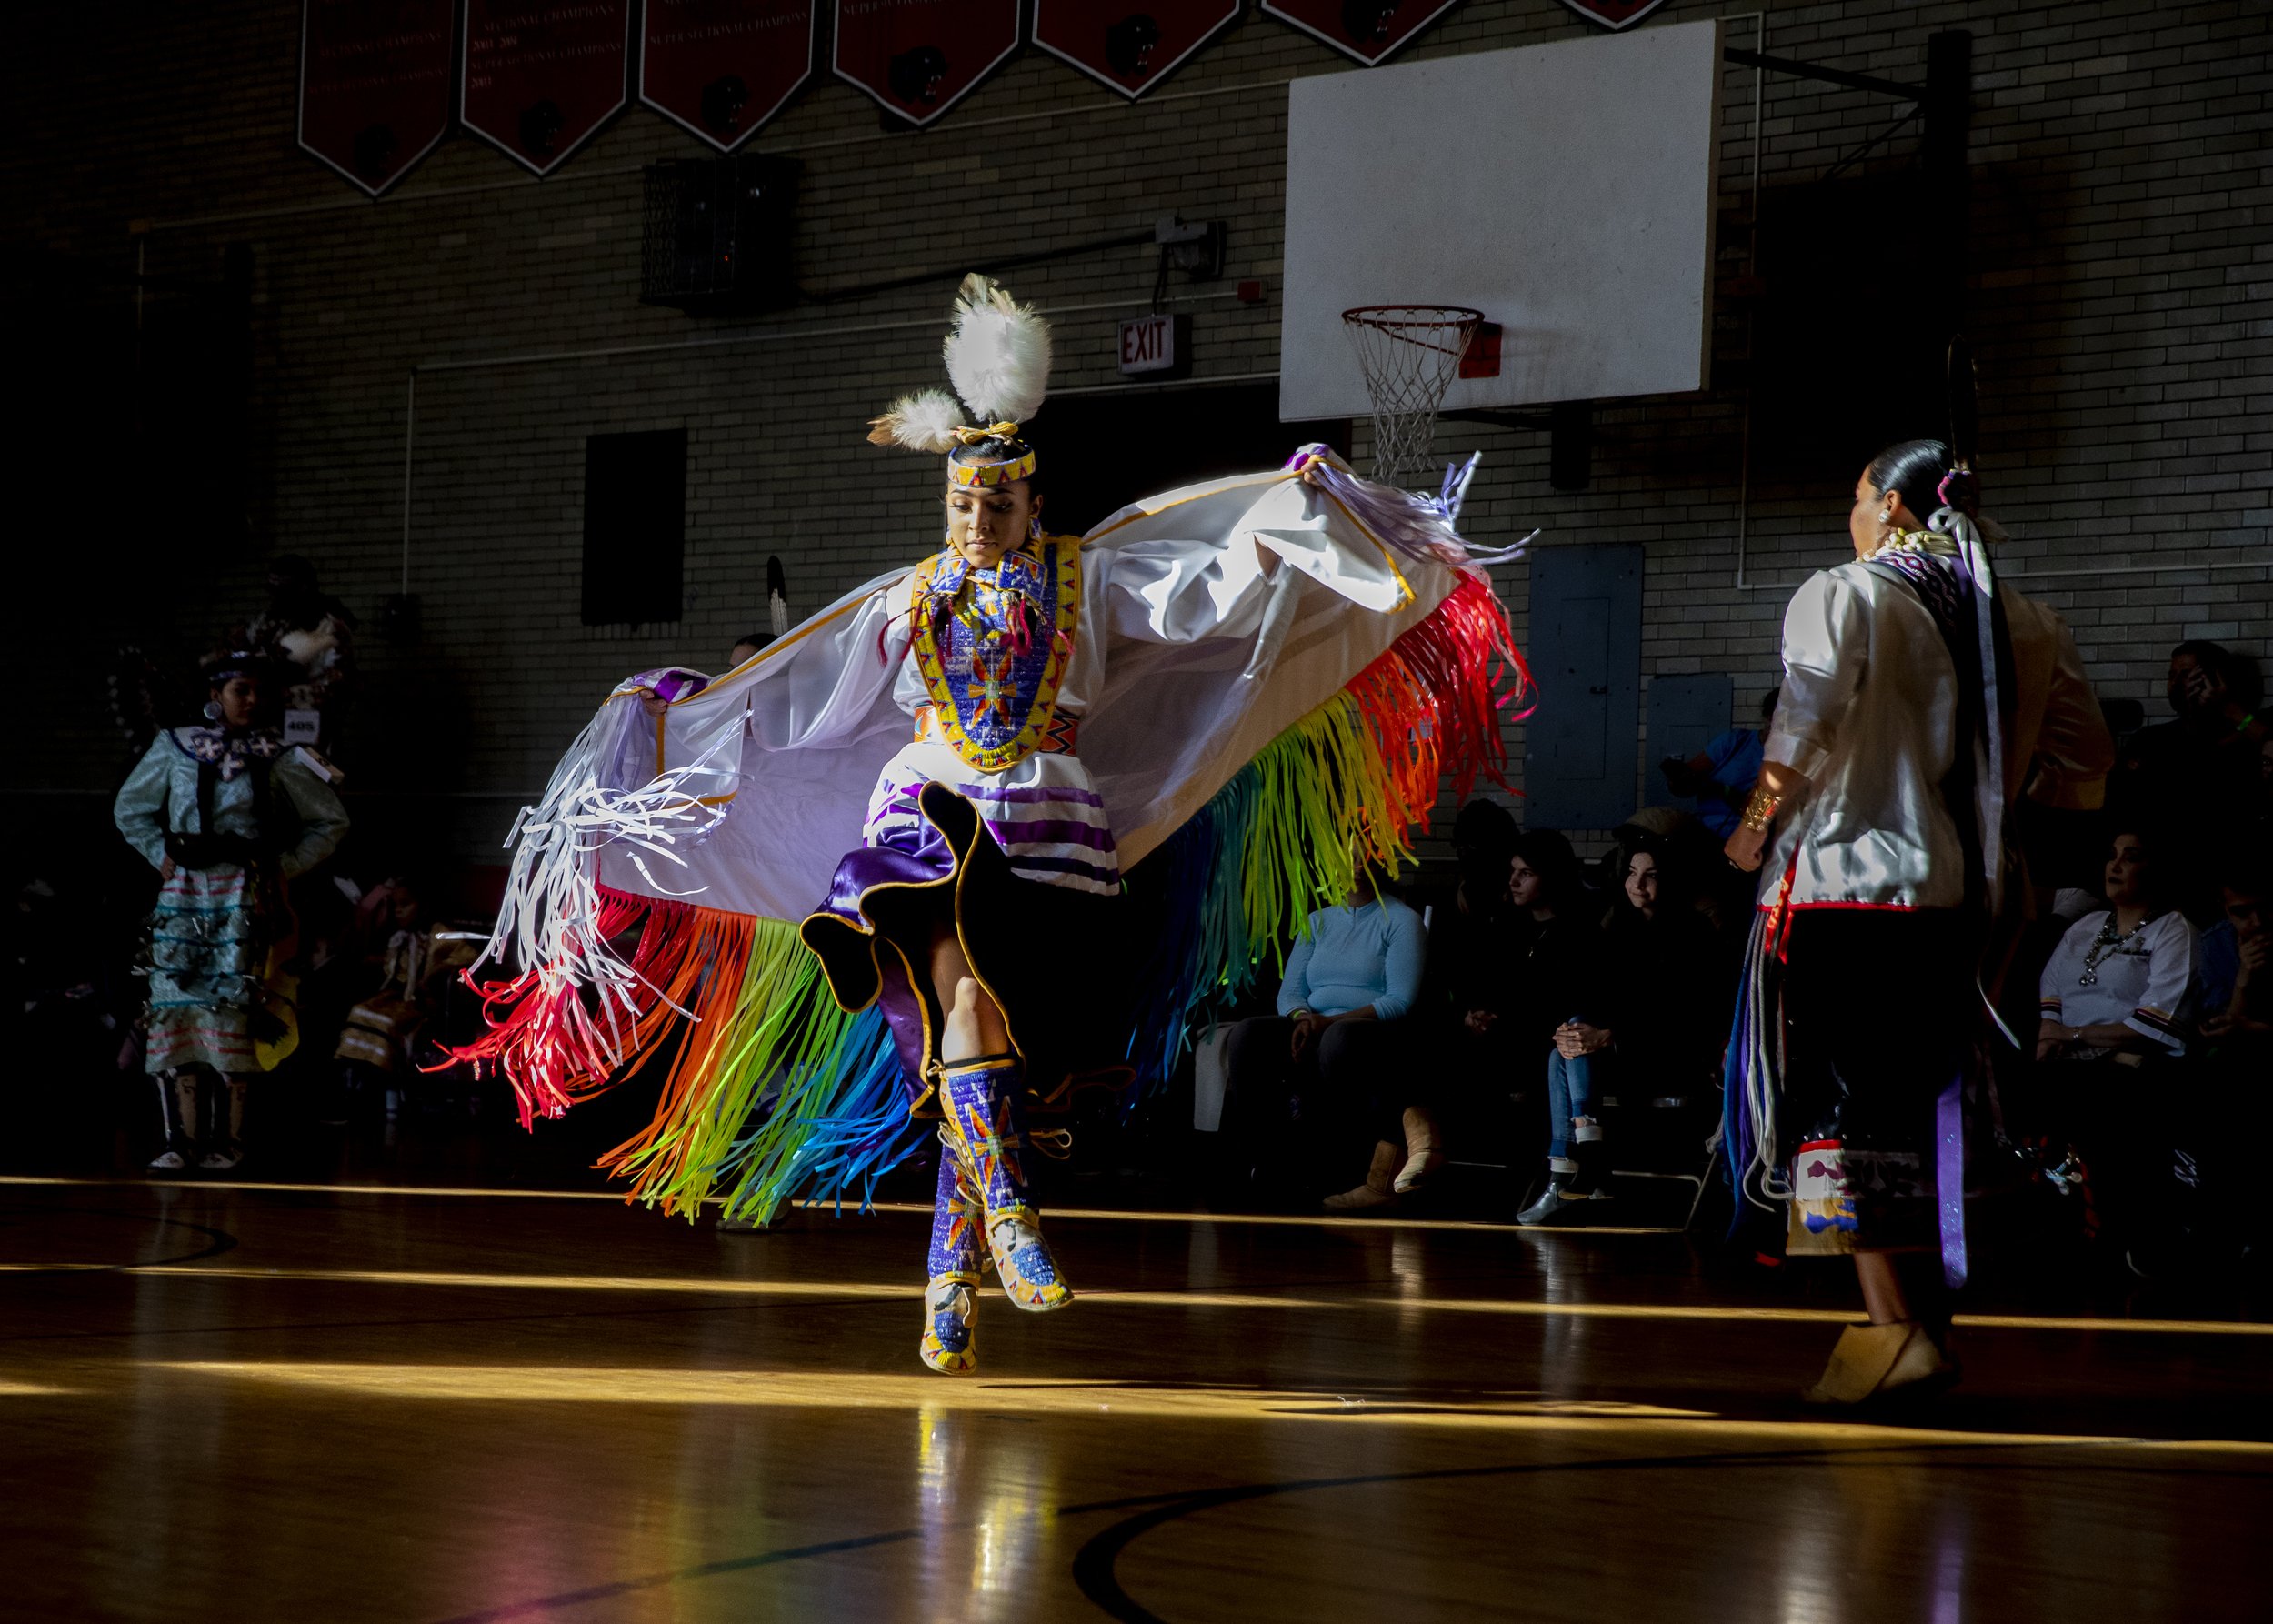  Beedoskah Stonefish competes in a dance competition for the 66th annual Chicago Powwow hosted by the American Indian Center at Von Steuben Metropolitan High School in Chicago's North Park neighborhood on Nov. 9, 2019. (Camille Fine / Chicago Tribune